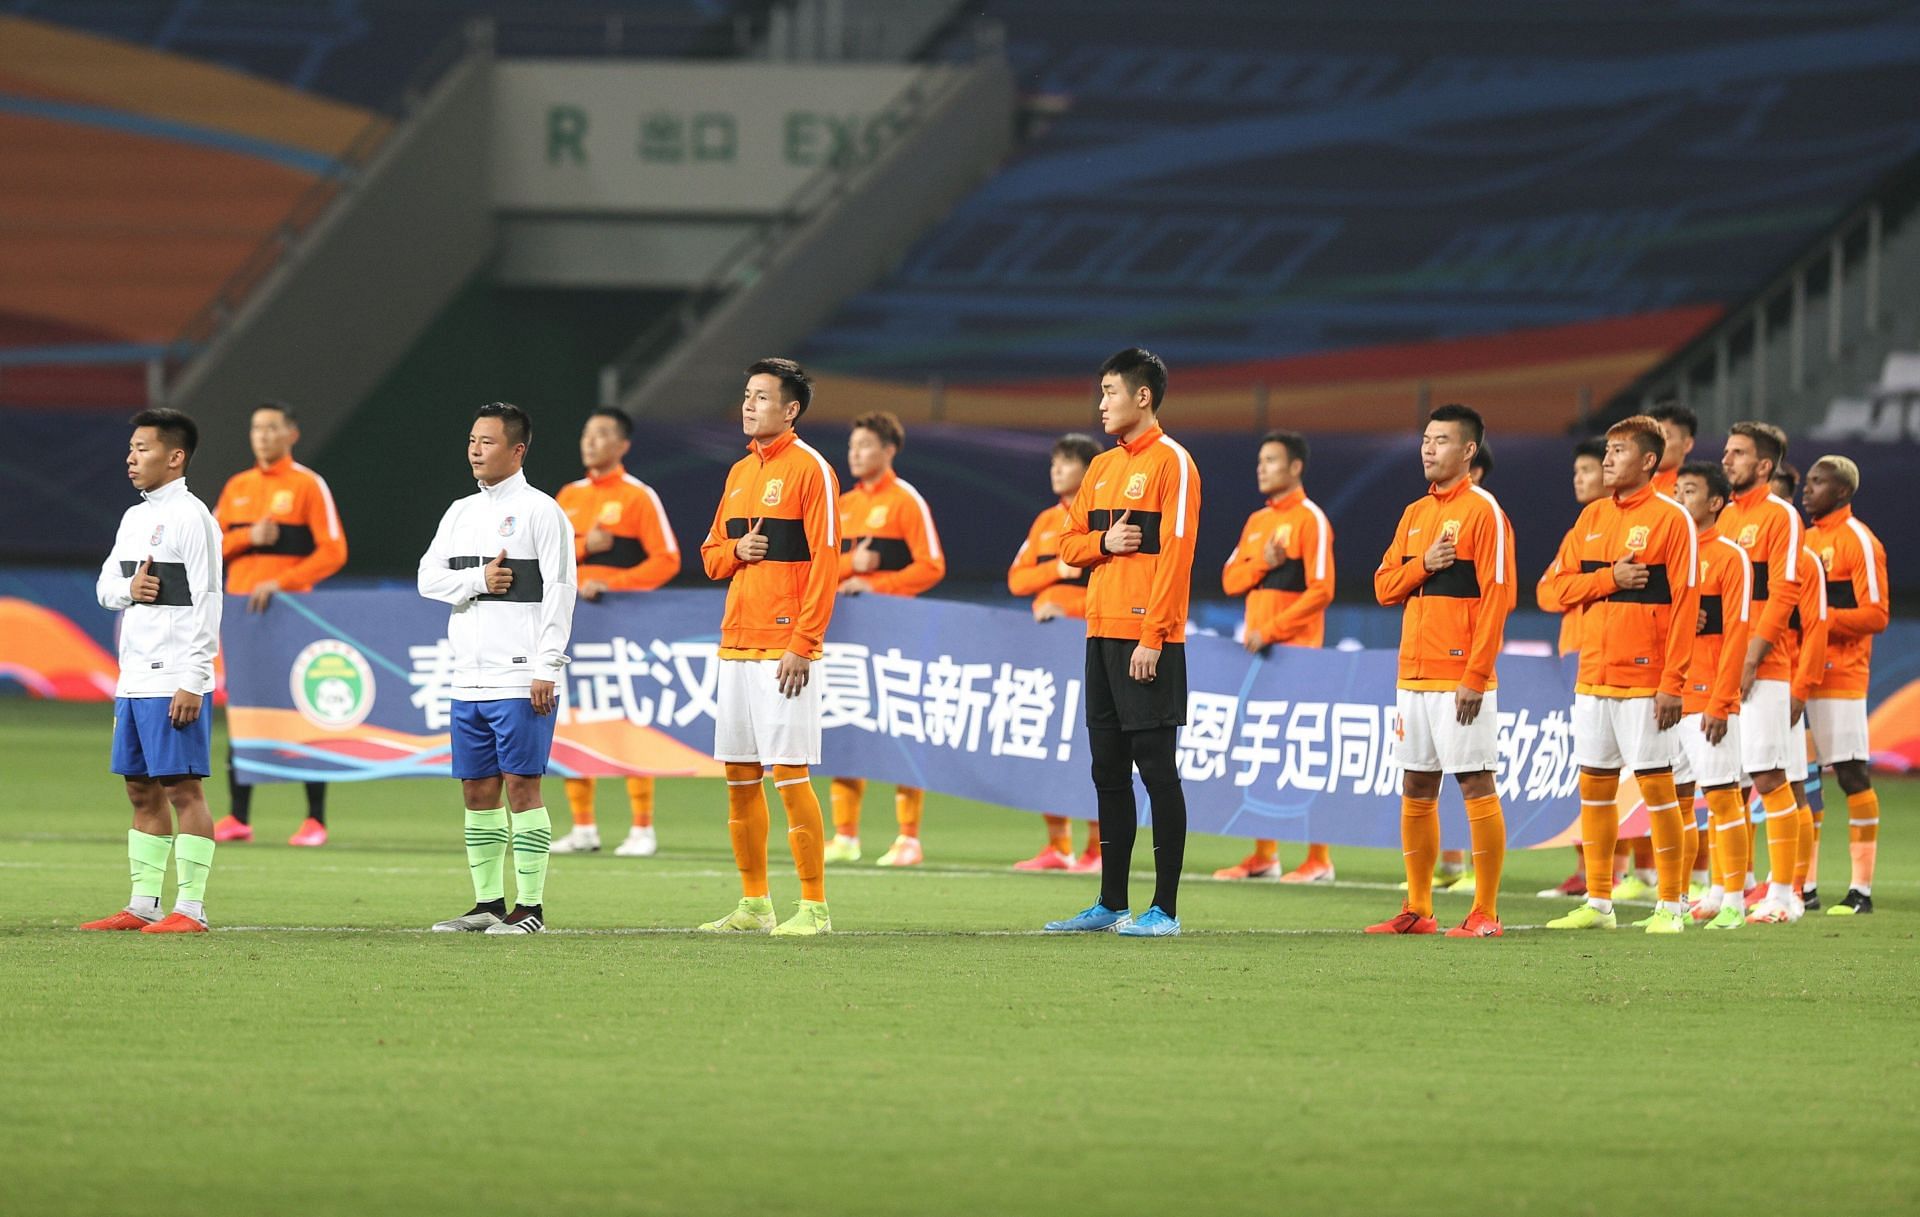 Wuhan will host Qingdao on Tuesday - Chinese Super League